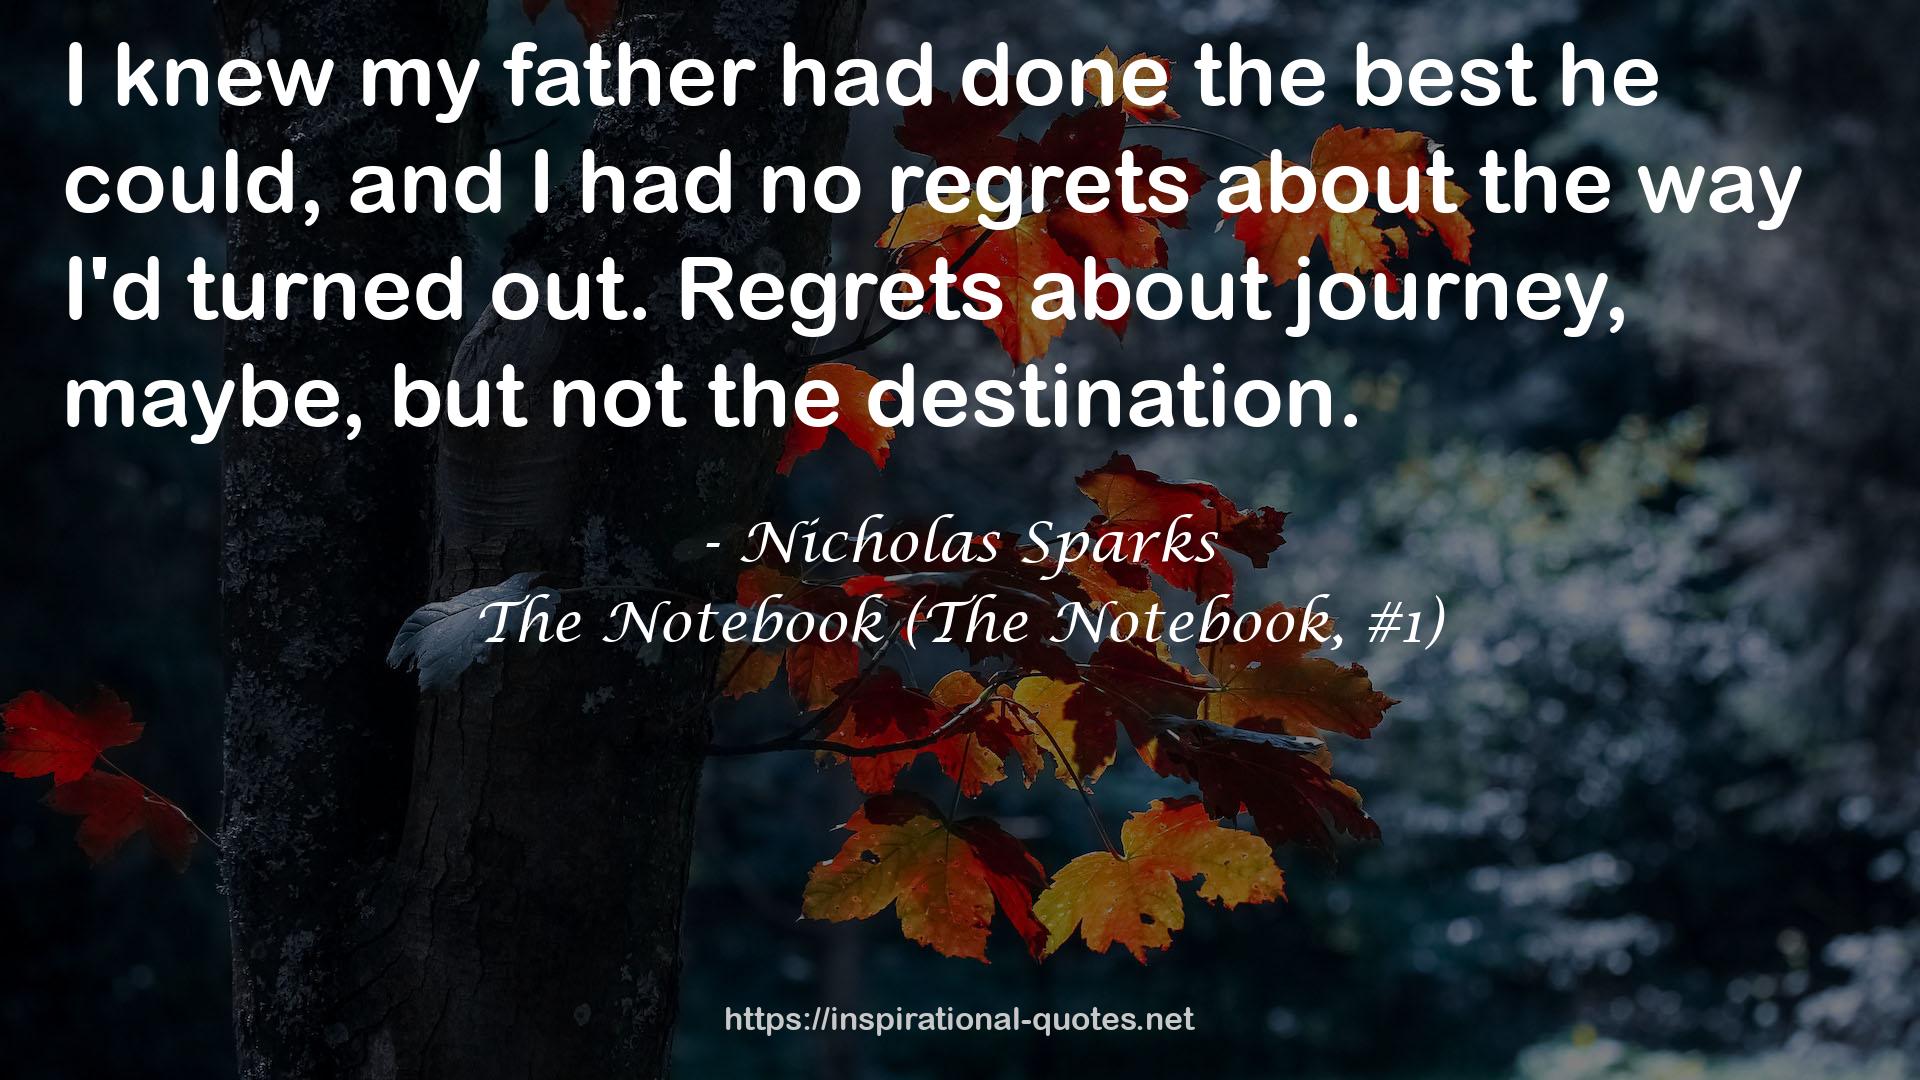 The Notebook (The Notebook, #1) QUOTES